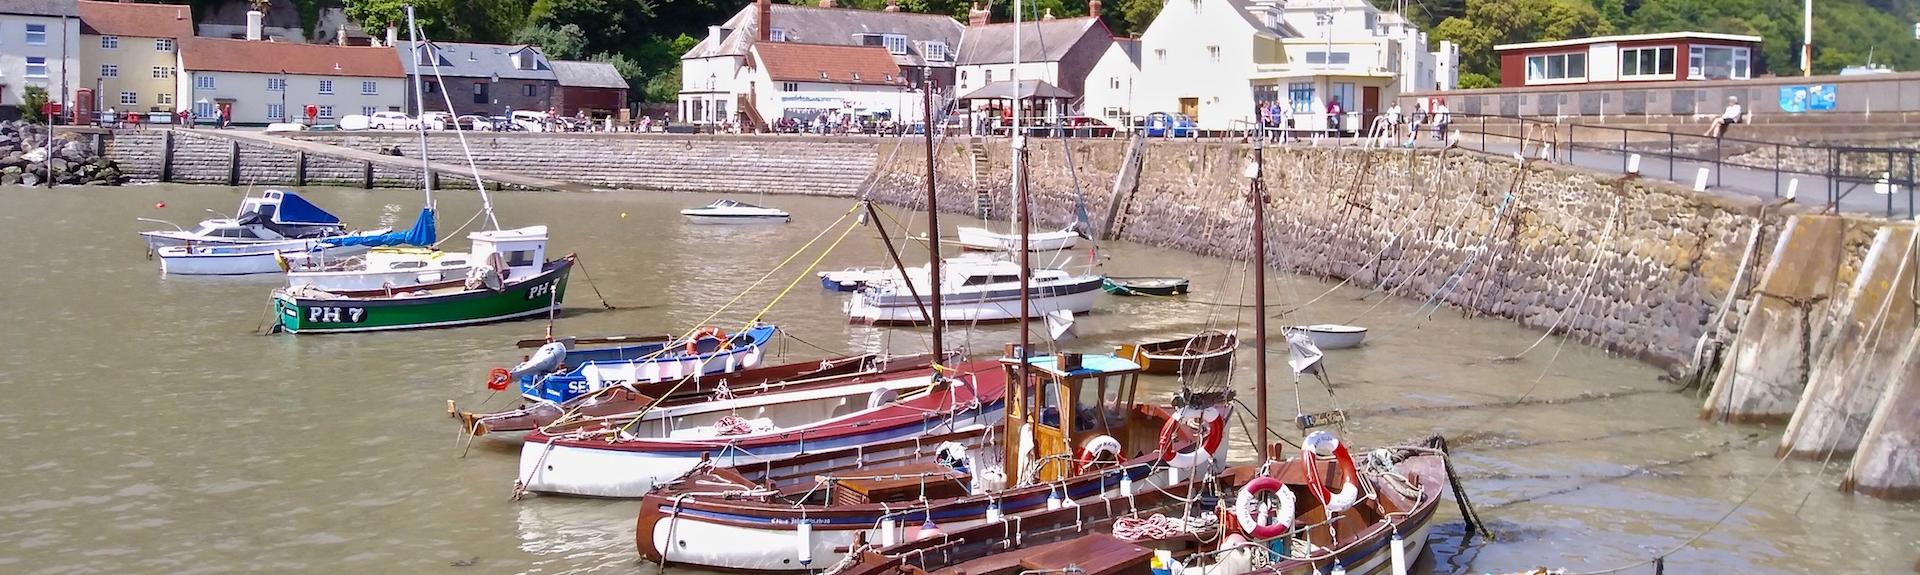 Fishing boats and small craft moored in rows in Minehead harbour